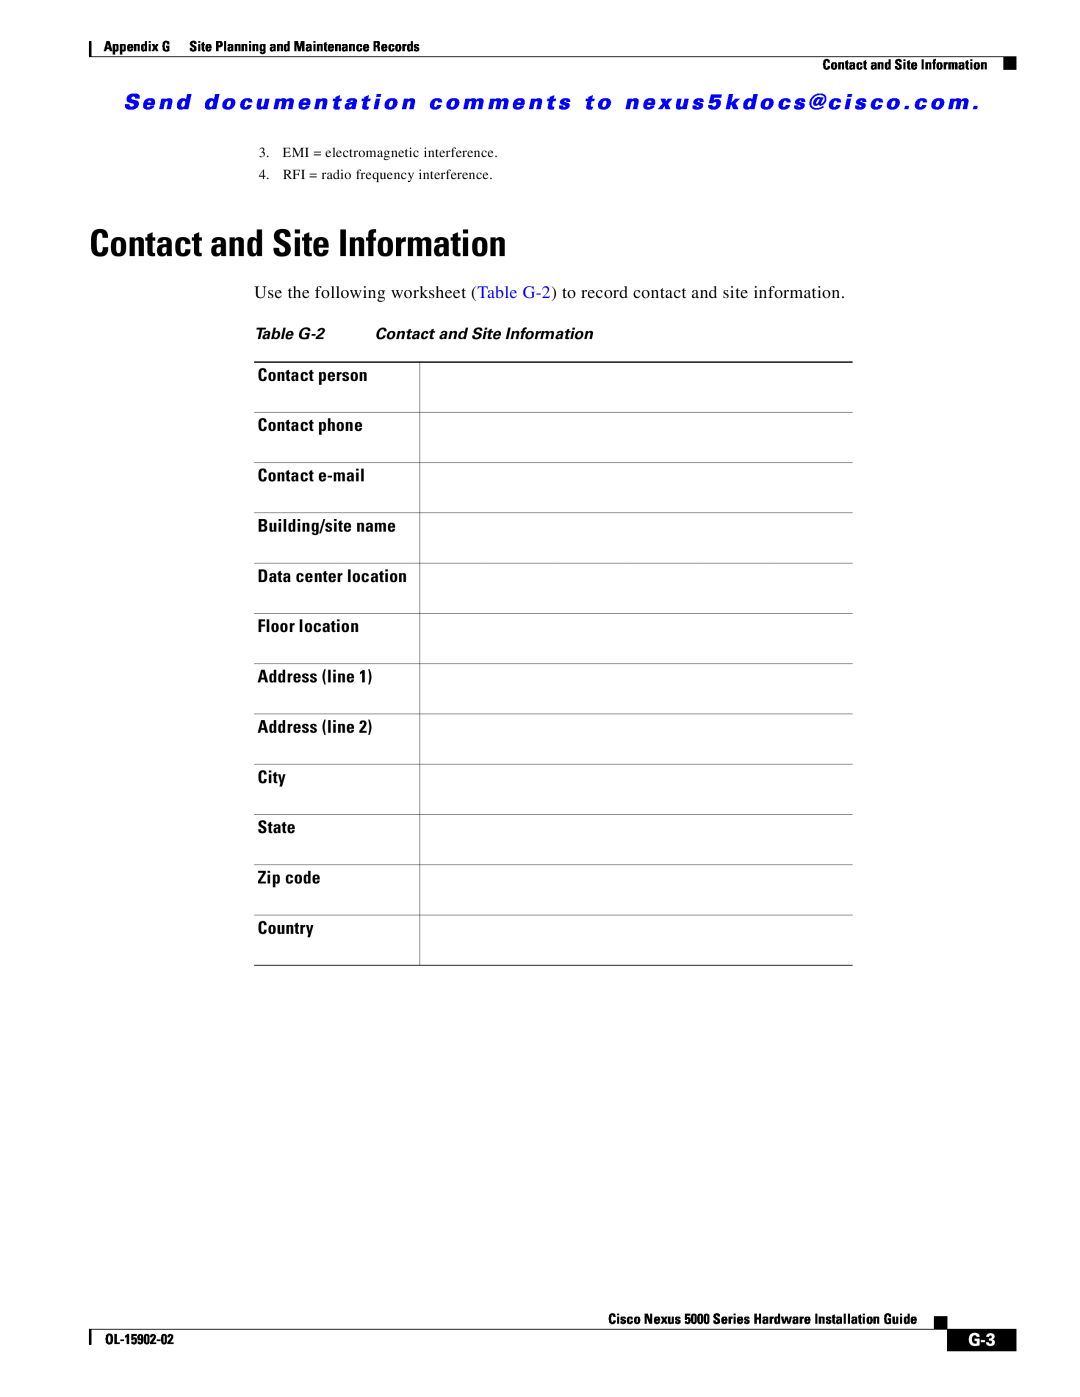 Cisco Systems 5000 Table G-2 Contact and Site Information, Appendix G Site Planning and Maintenance Records, OL-15902-02 